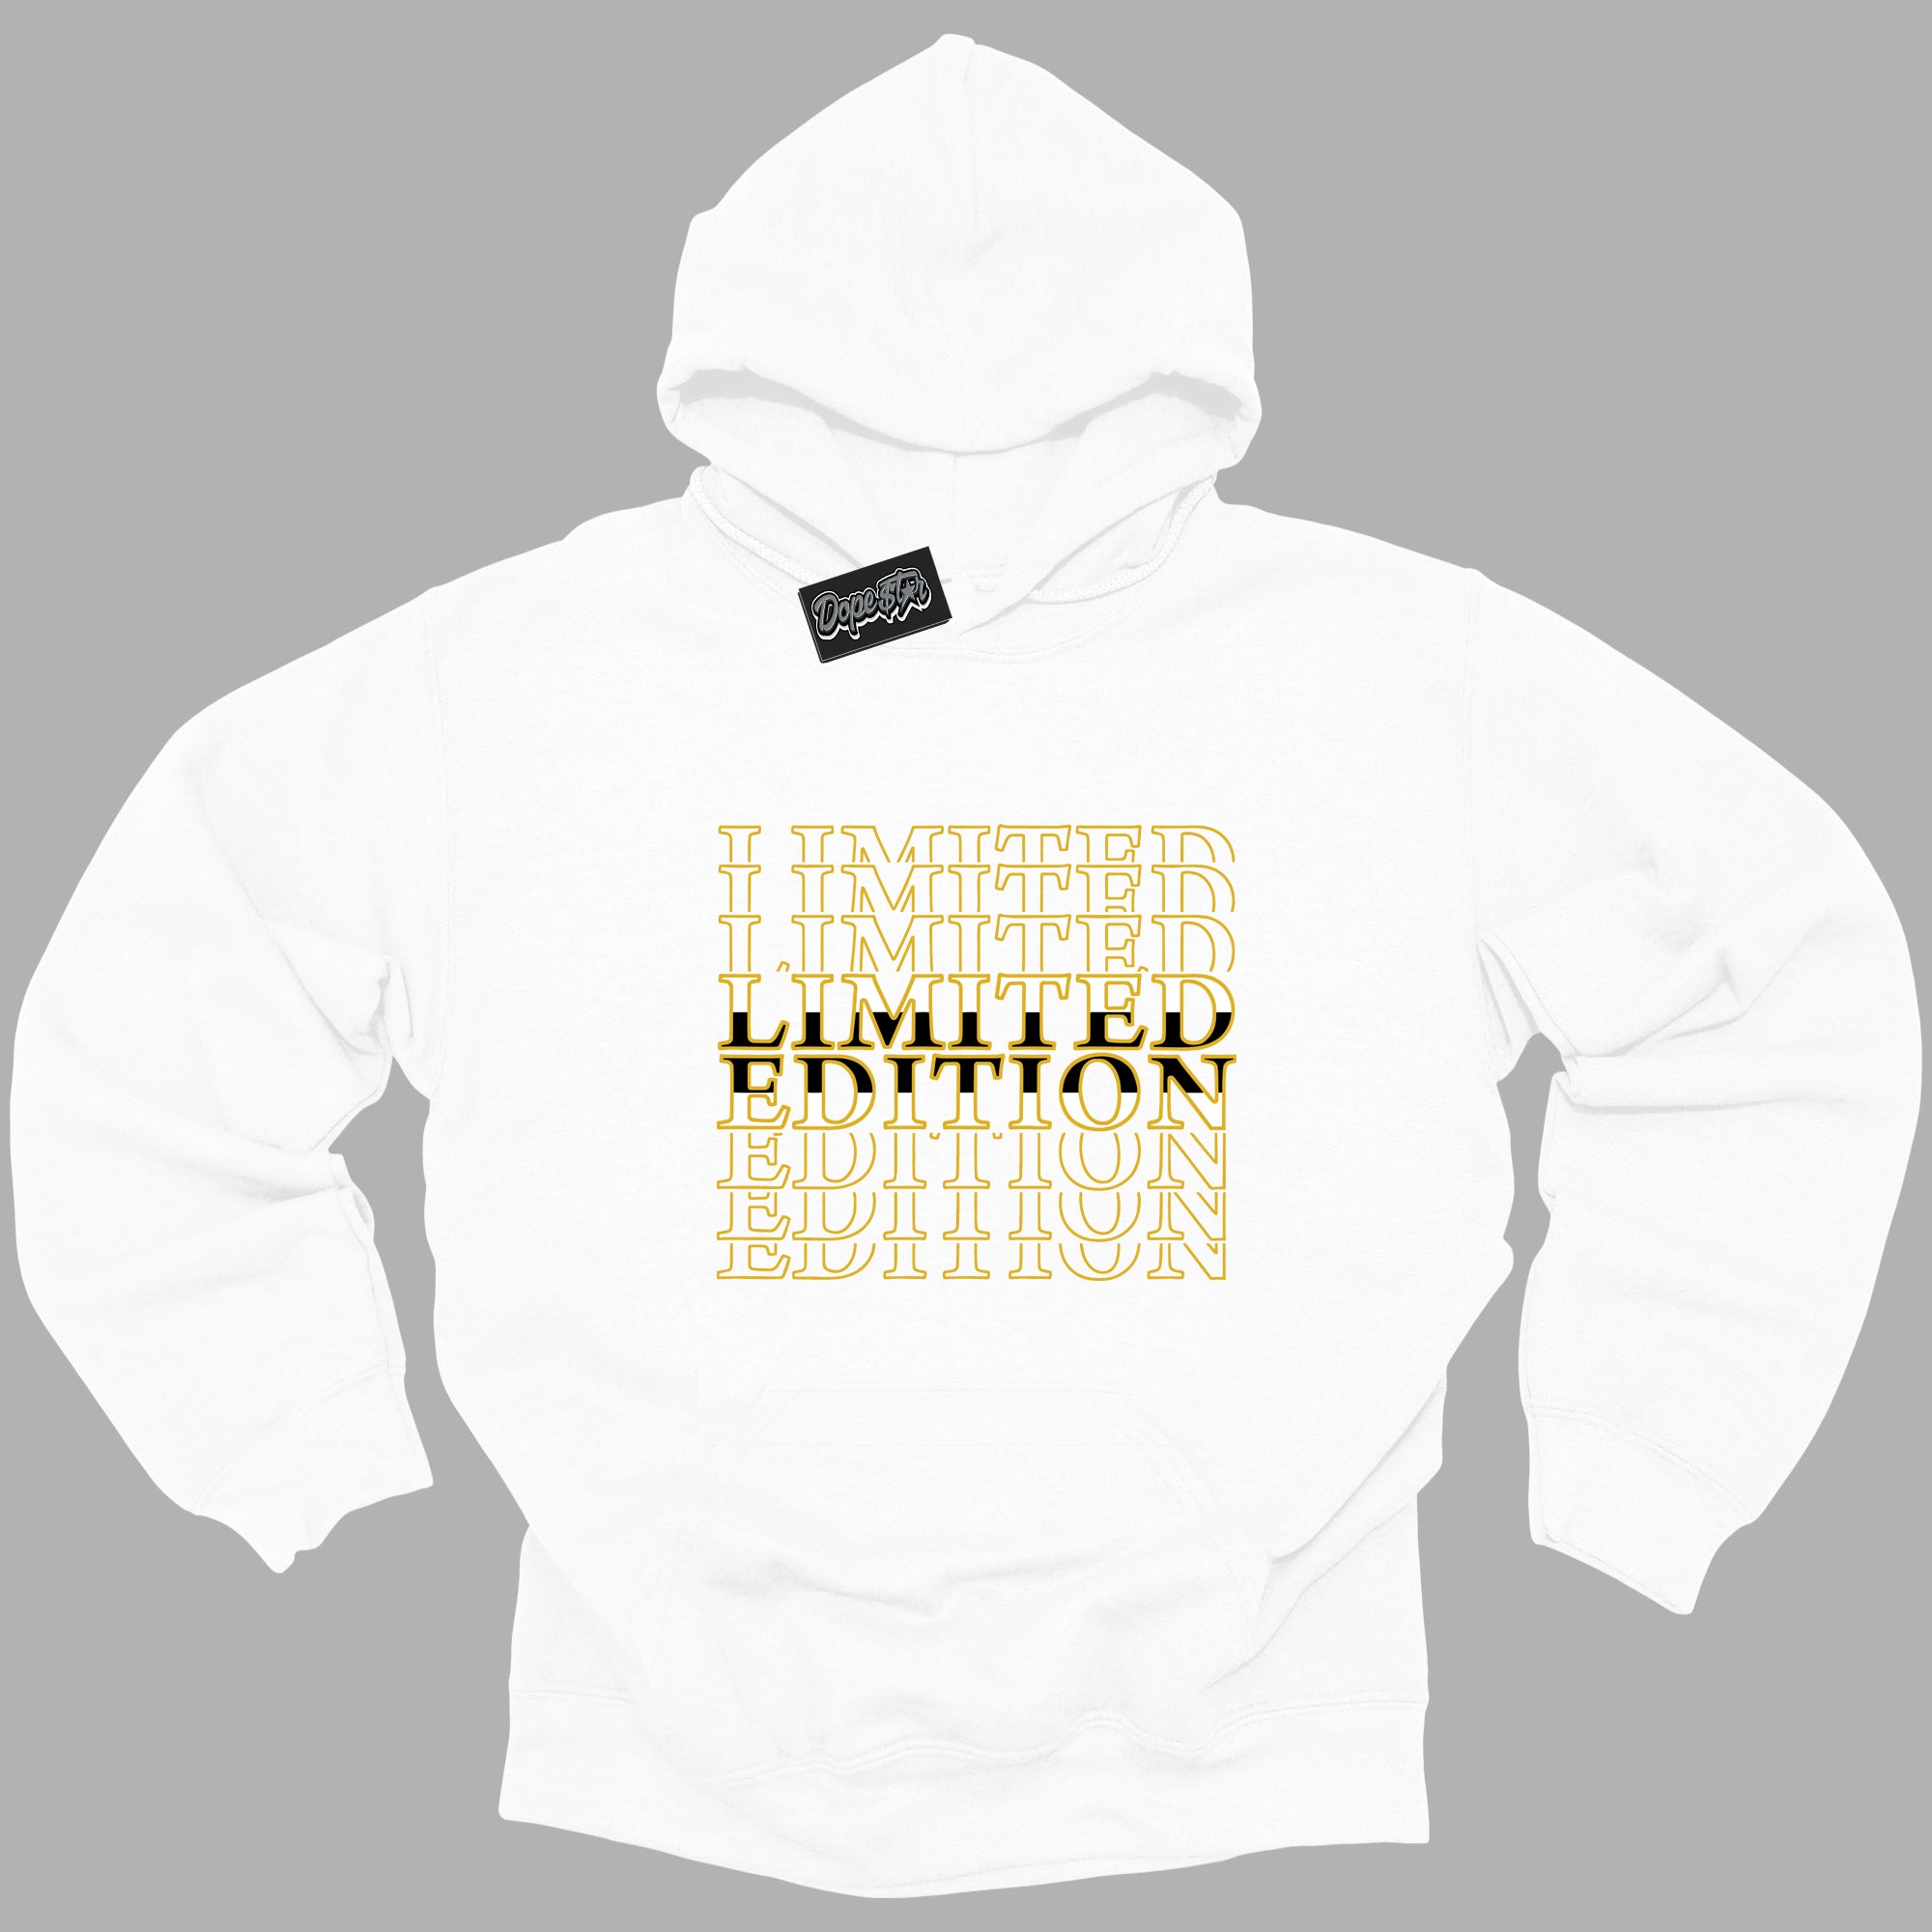 Cool White Hoodie with “Limited Edition ”  design that Perfectly Matches Yellow Ochre 6s Sneakers.